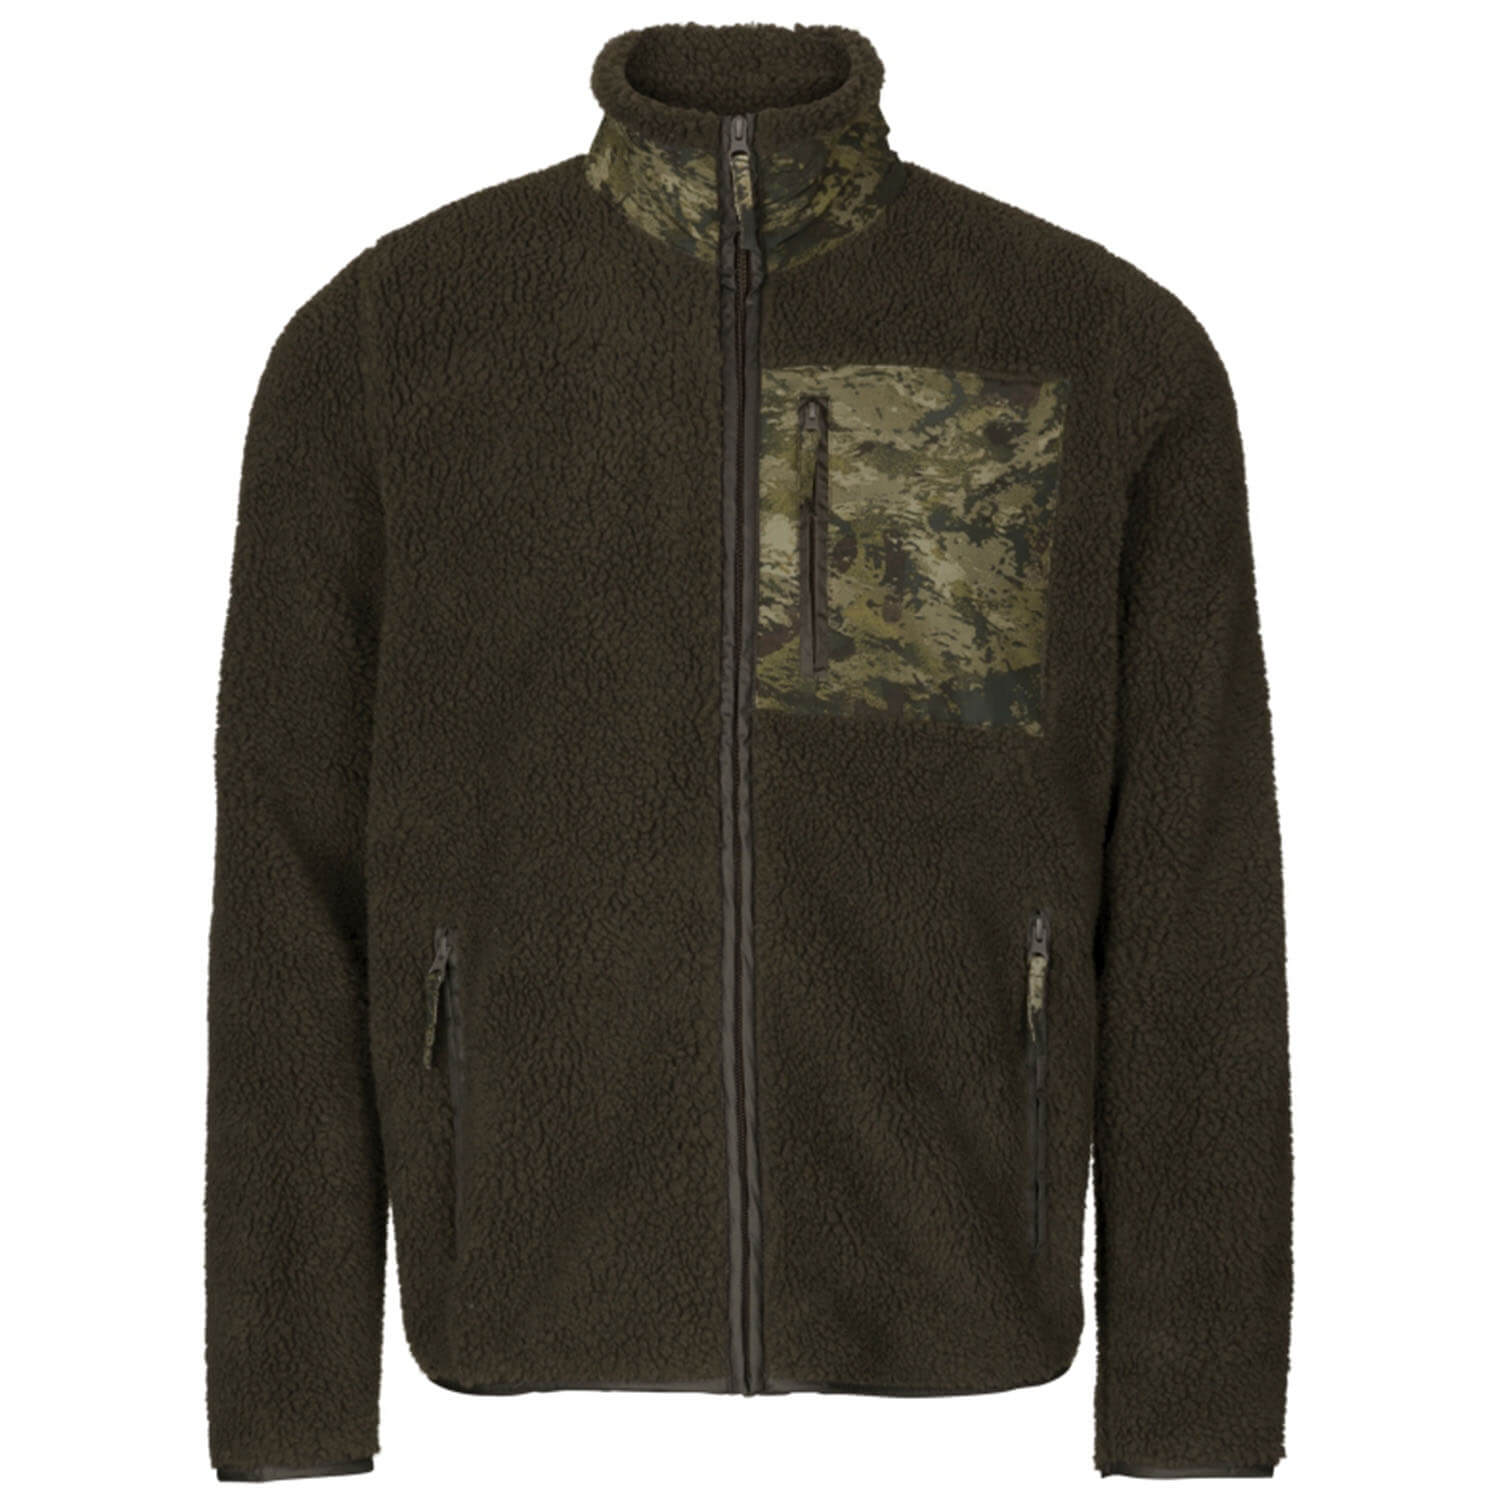  Seeland fleece jacket Zephyr (Grizzly Brown/InVis Green) - Hunting Jackets